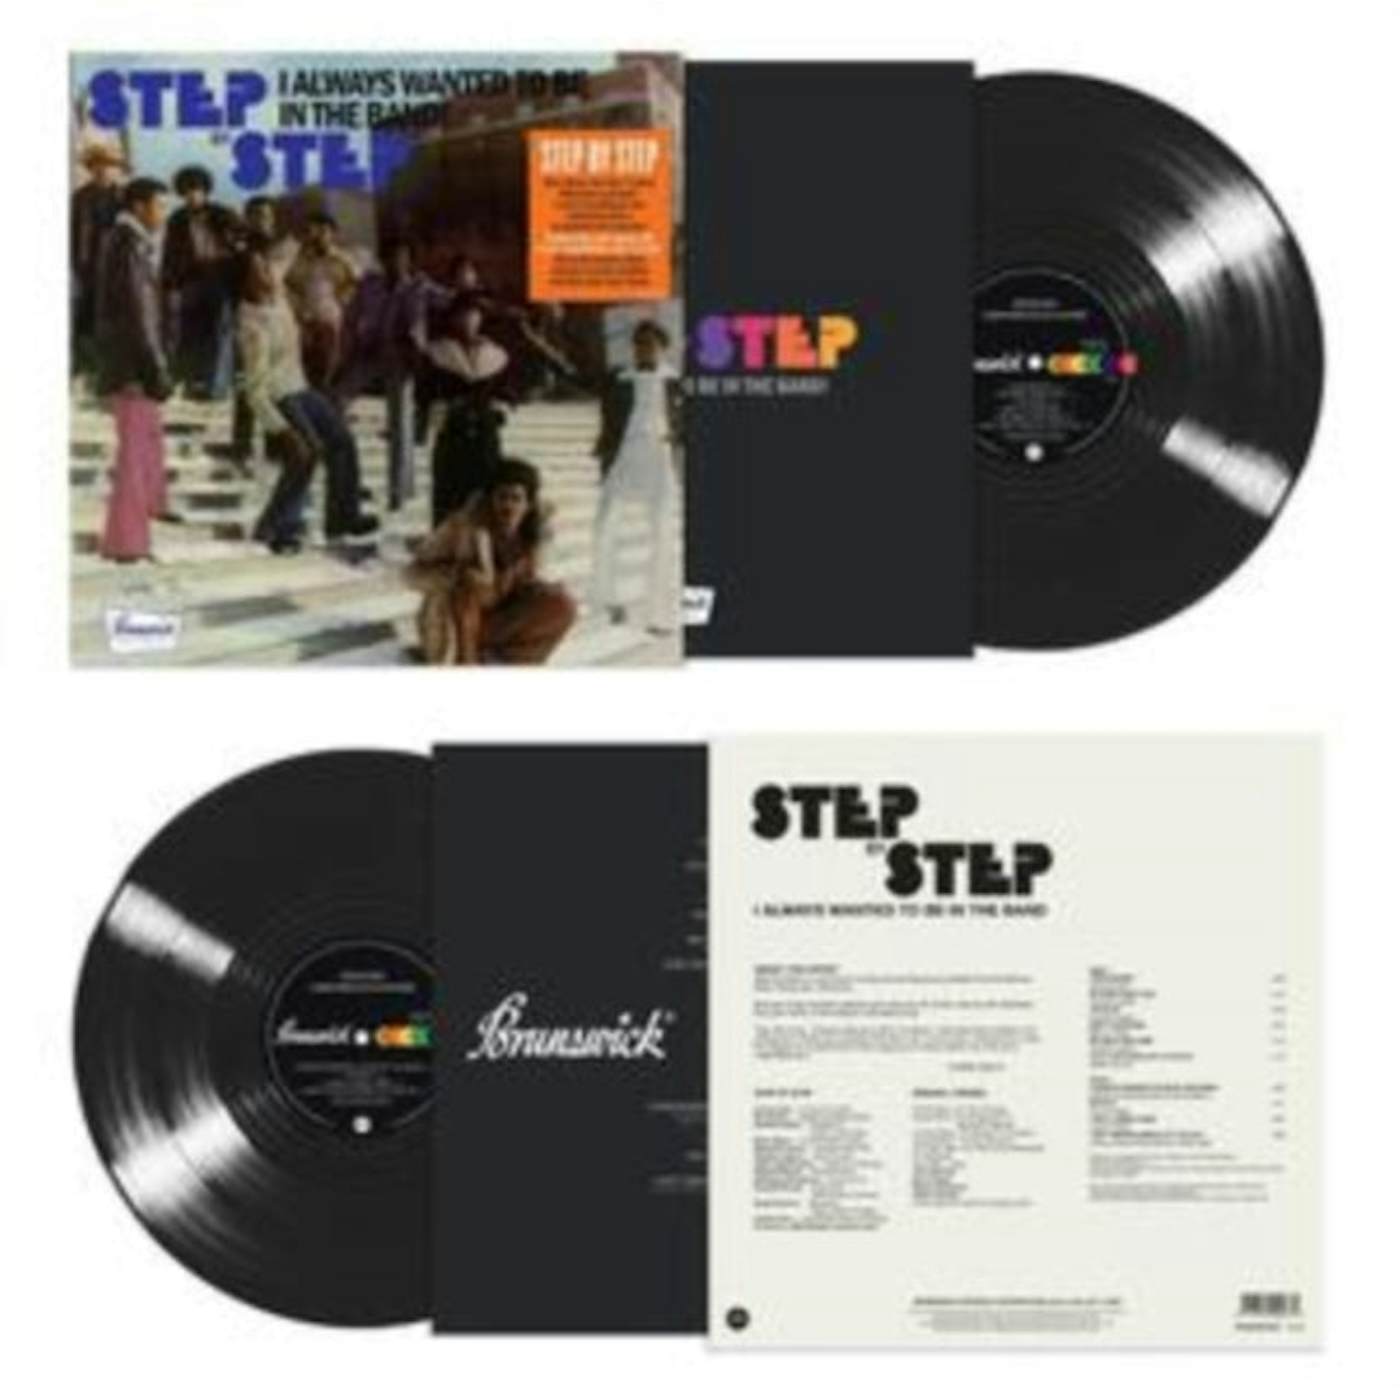 Step By Step LP Vinyl Record - I Always Wanted To Be In The Band